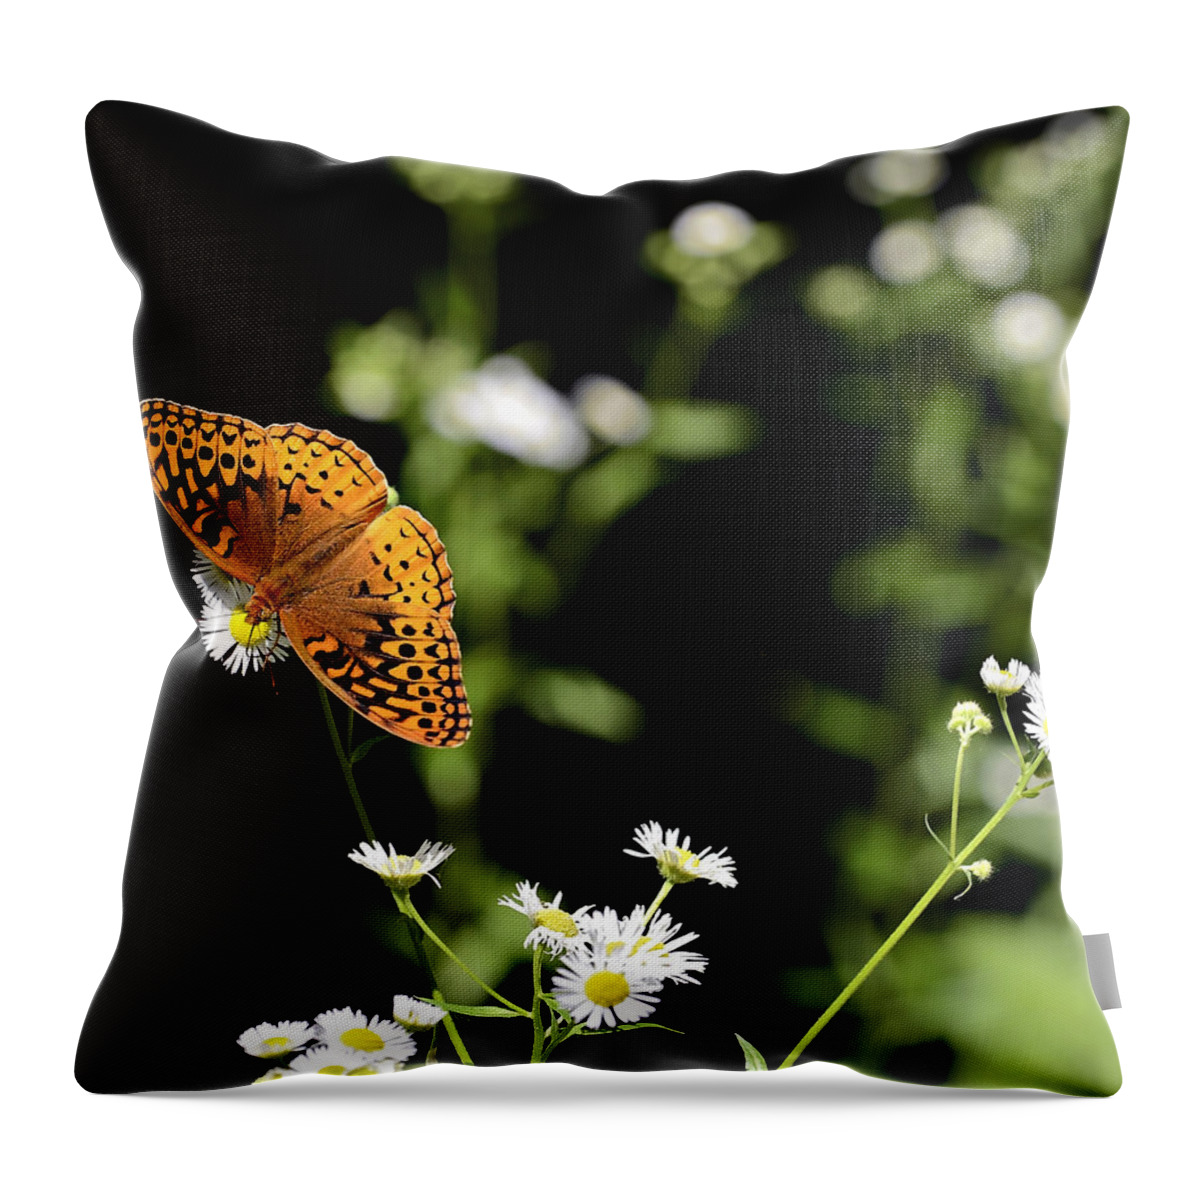 Butterfly Throw Pillow featuring the photograph Peaceful Forest by Susan Leggett